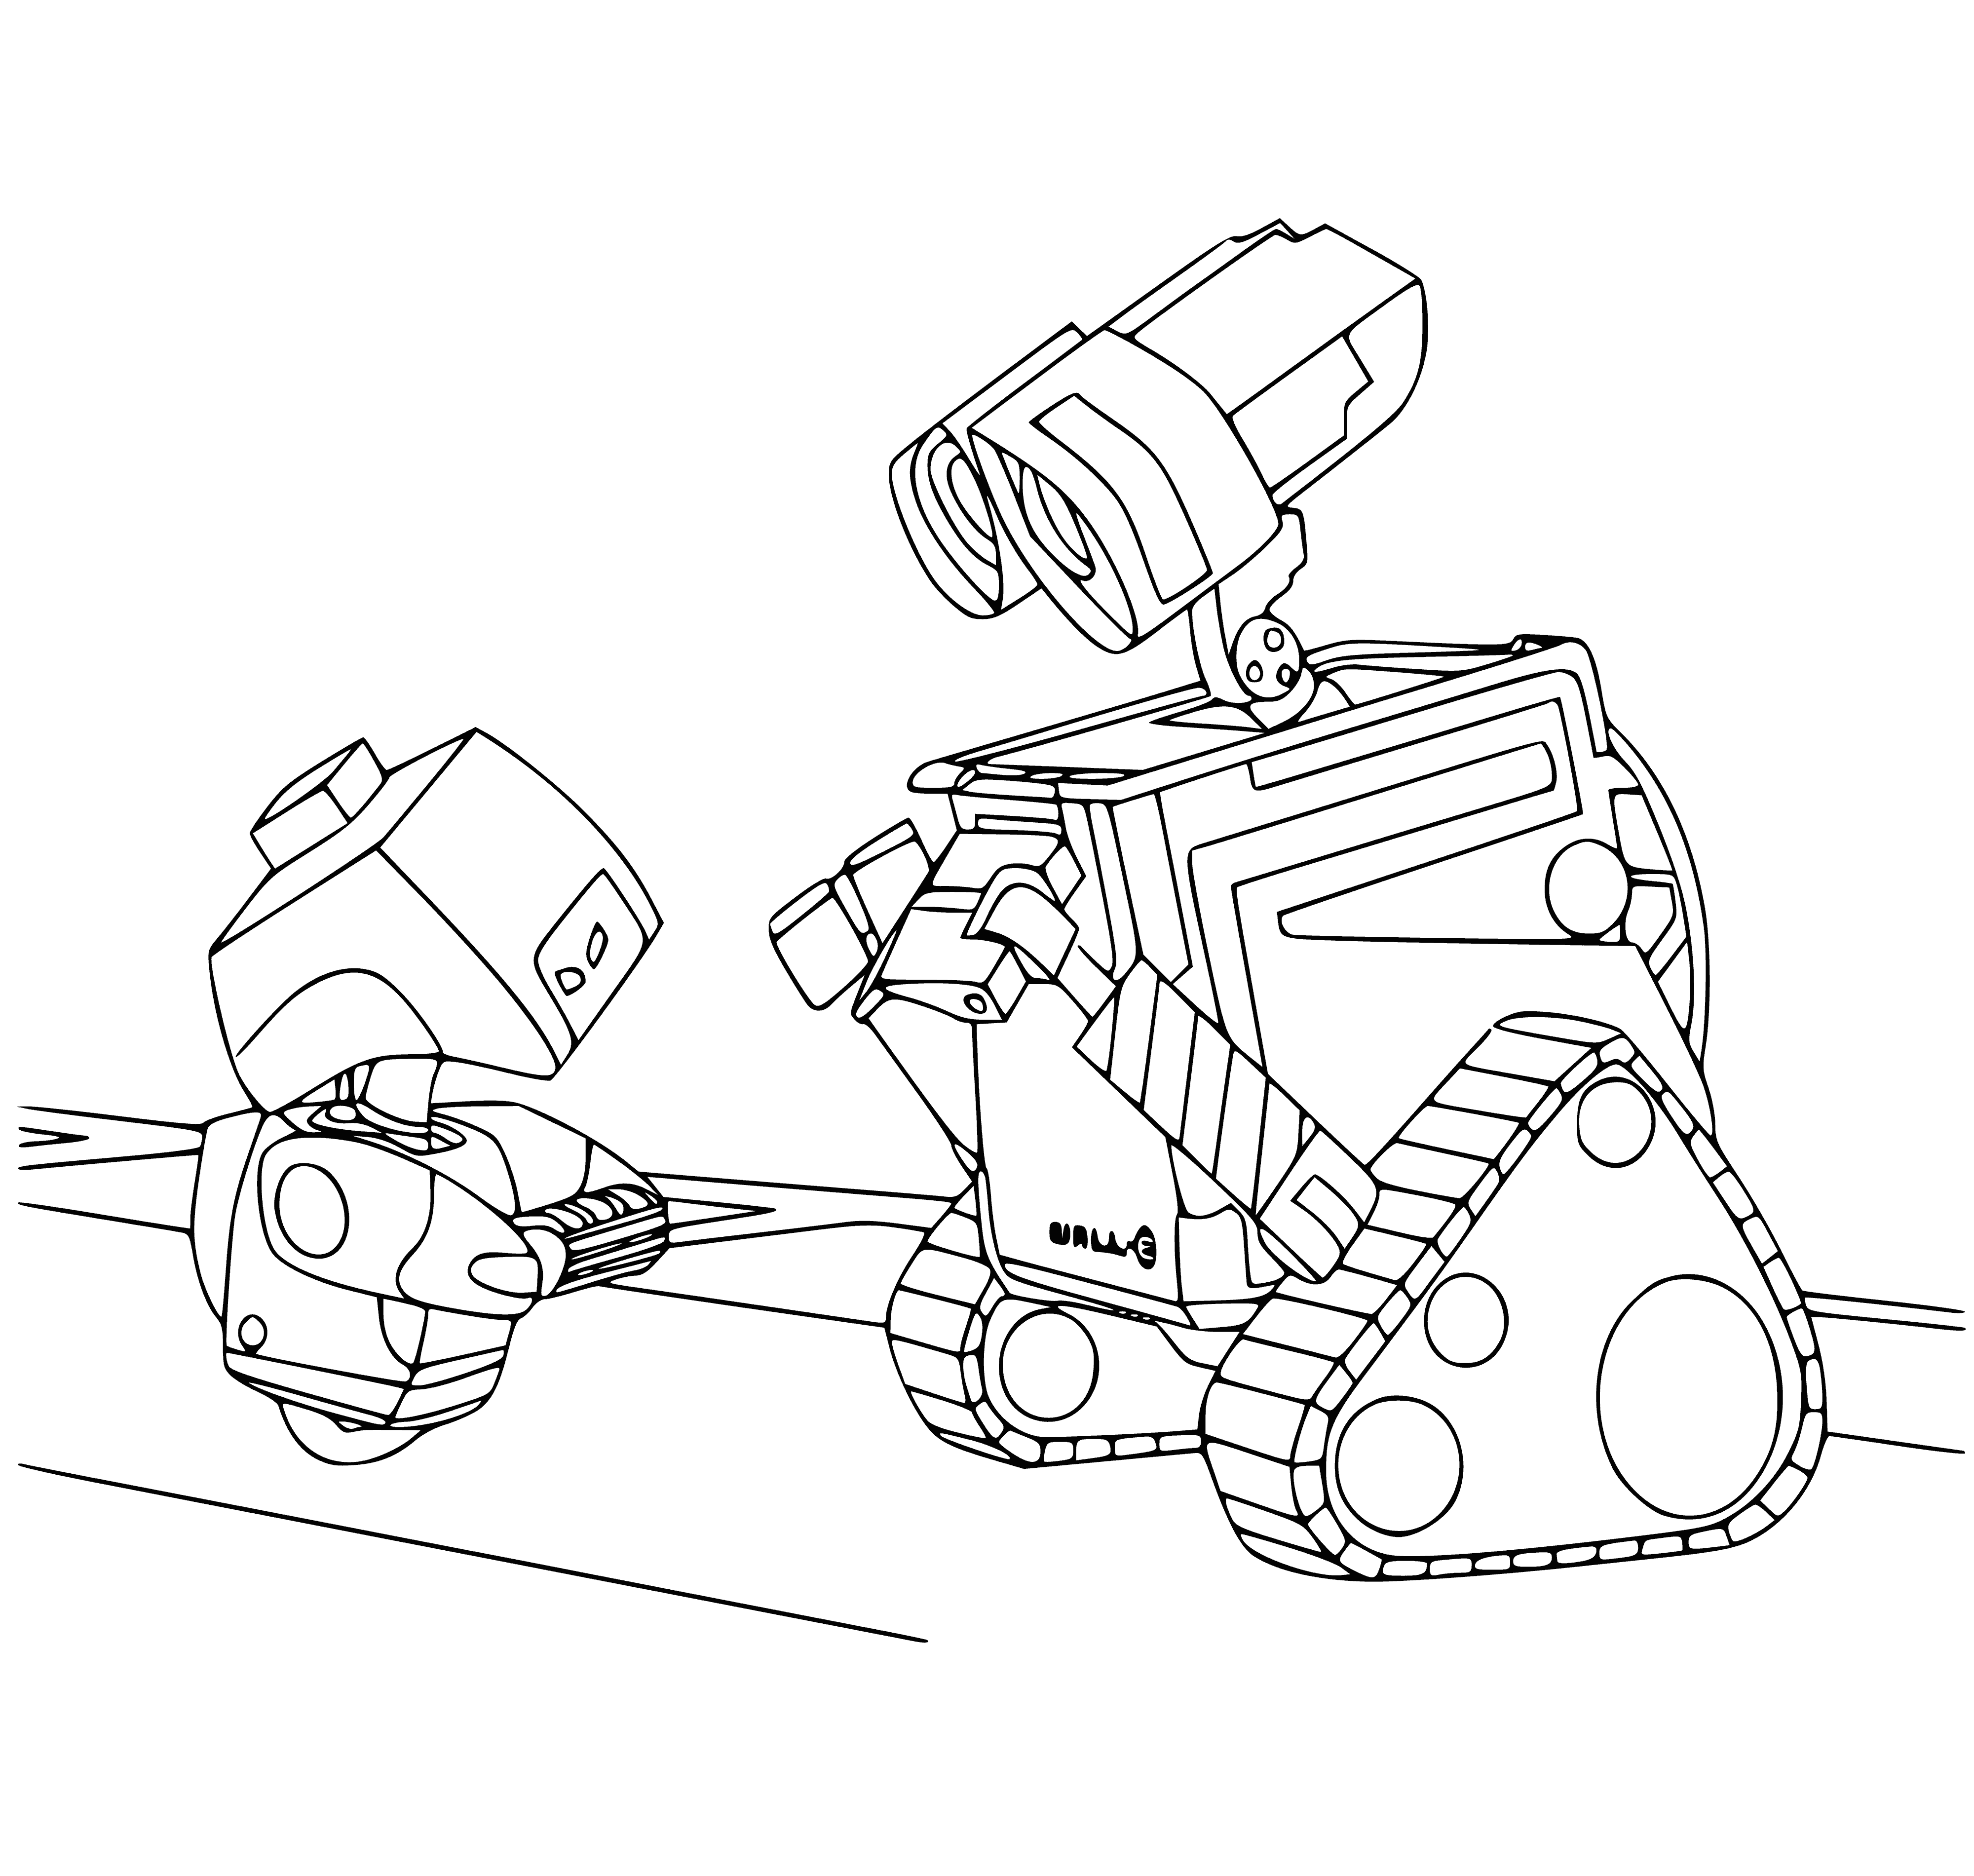 Valley coloring page